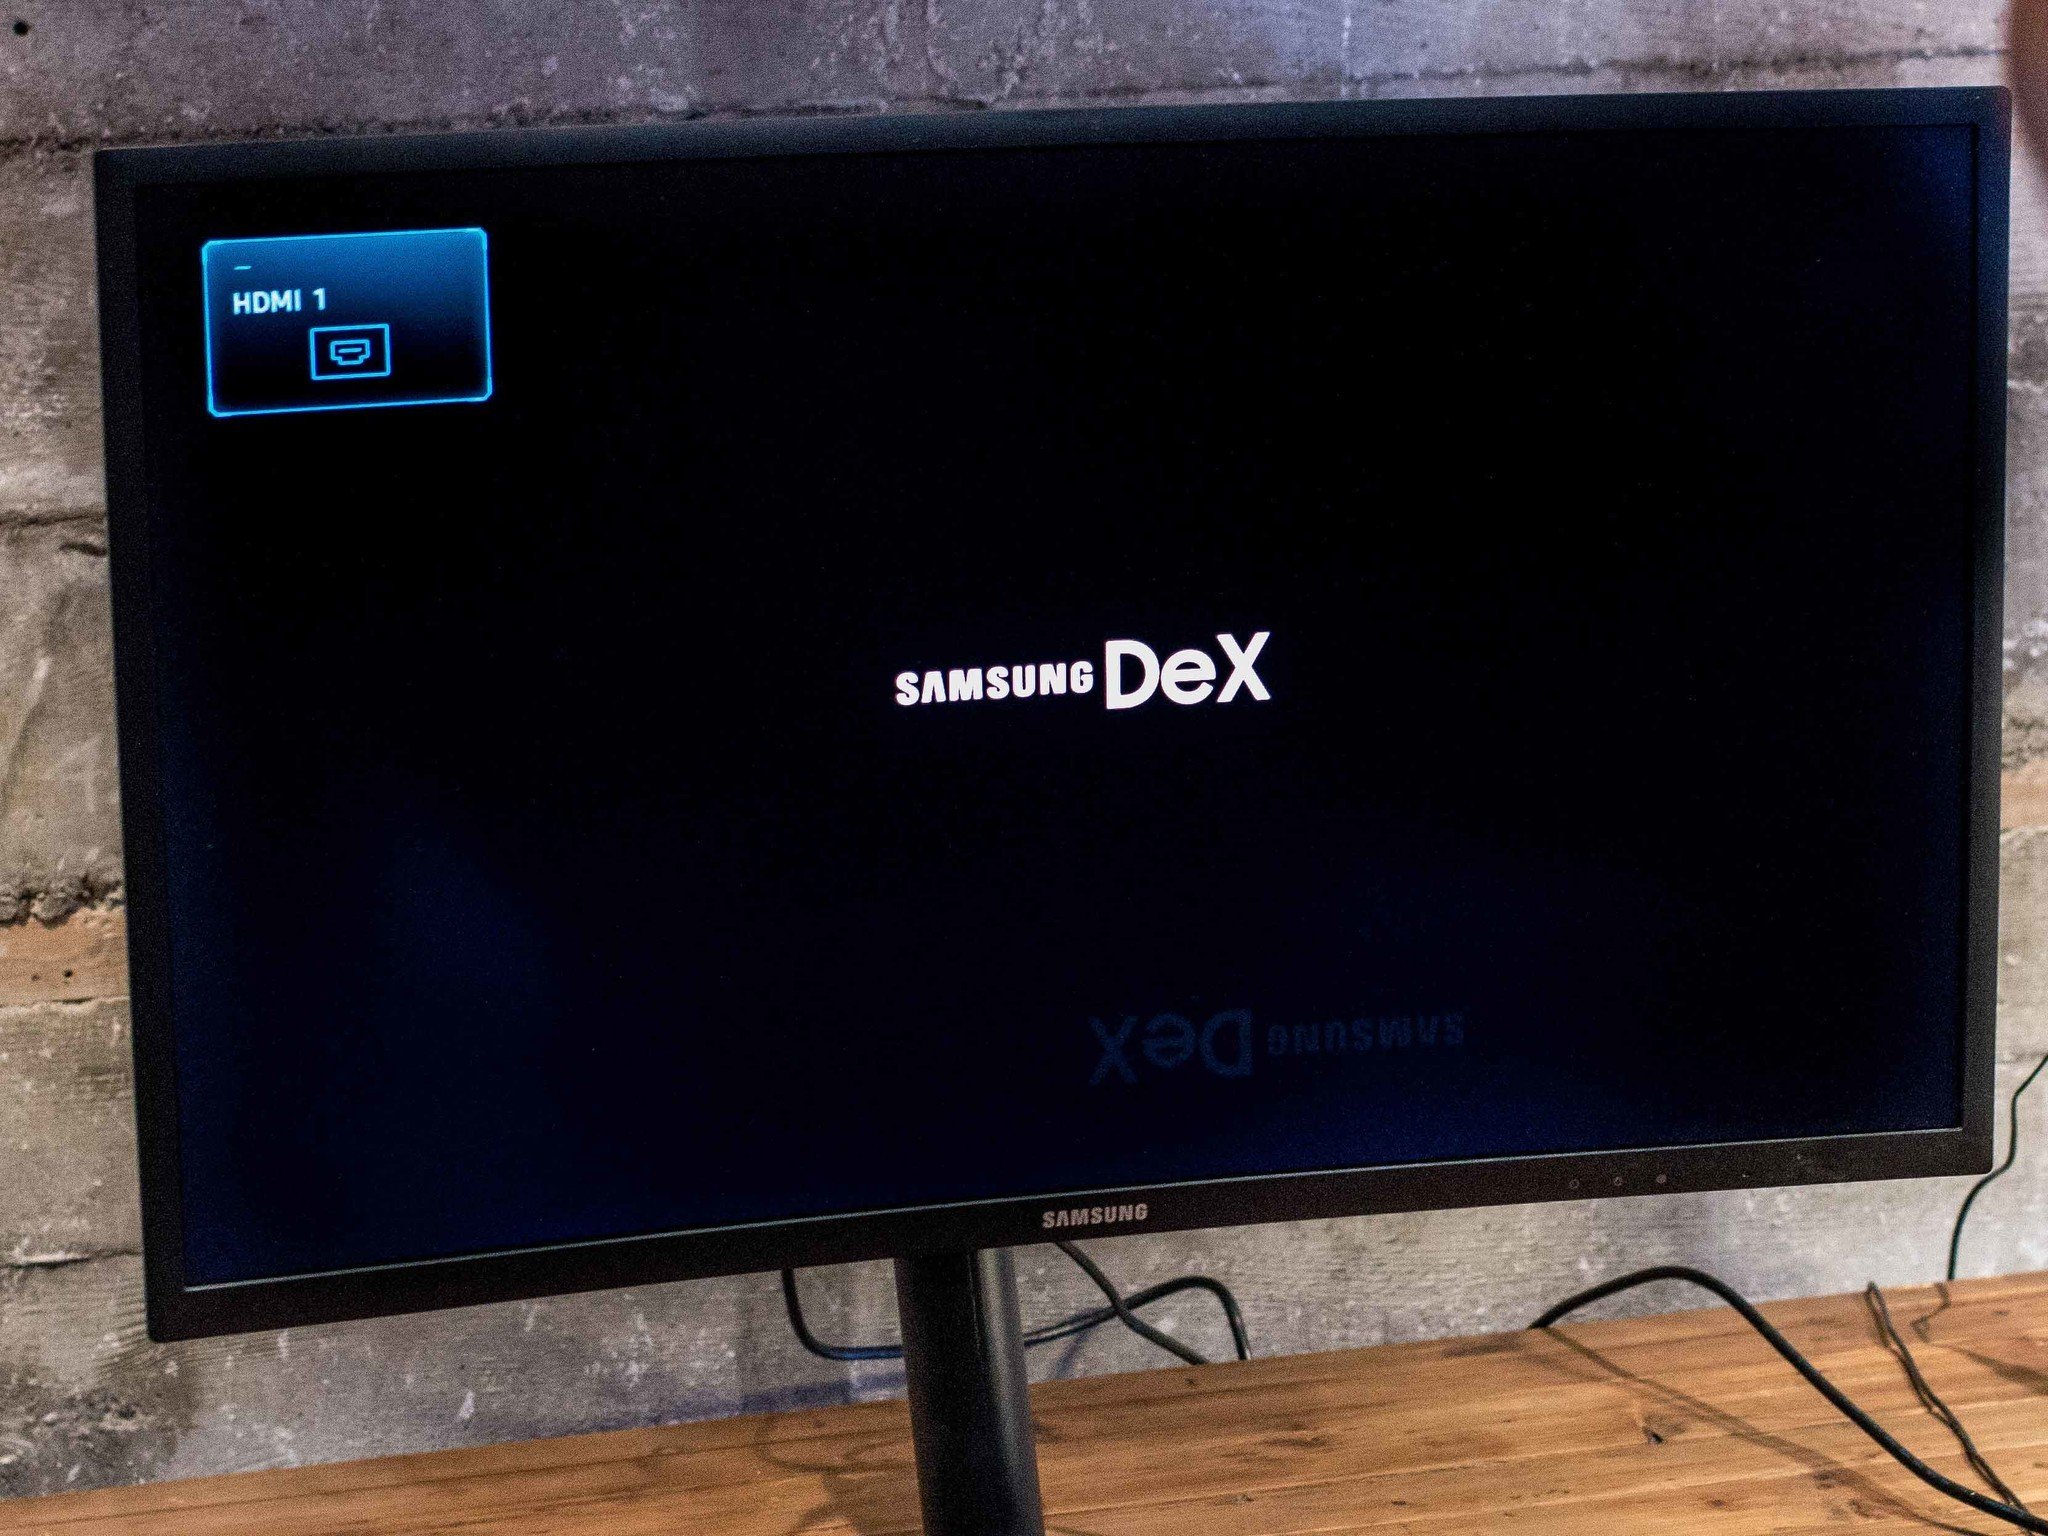 Samsung Dex Is Continuum For The Galaxy S8 With Support From Microsoft Windows Central